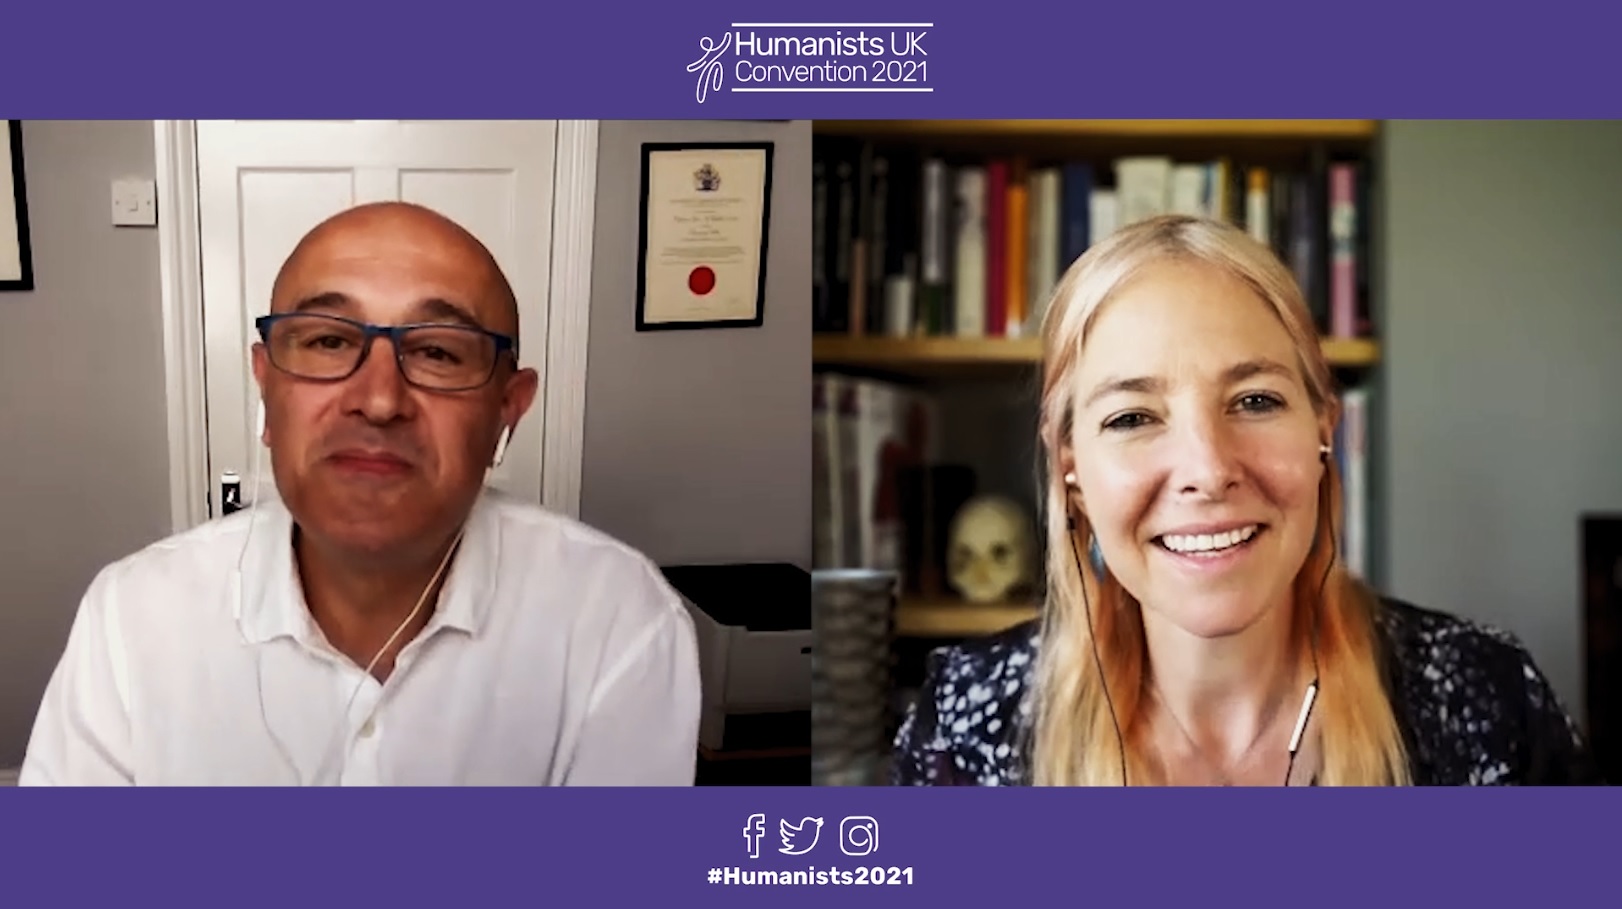 Jim Al-Khalili (L) and Alice Roberts (R) speaking at Humanists UK Convention 2021